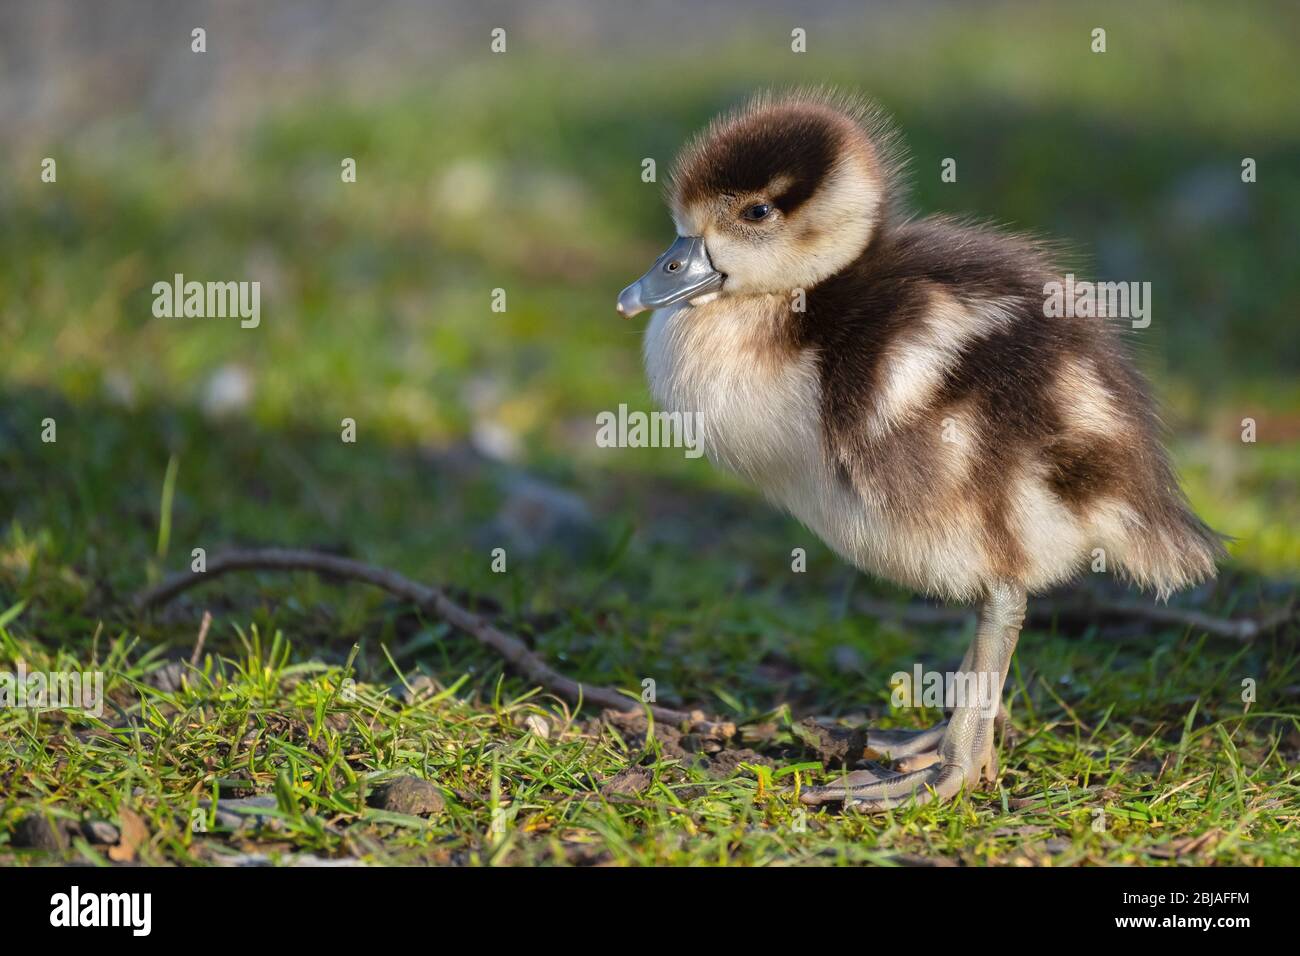 Egyptian goose (Alopochen aegyptiacus), a few day old chick, Germany Stock Photo